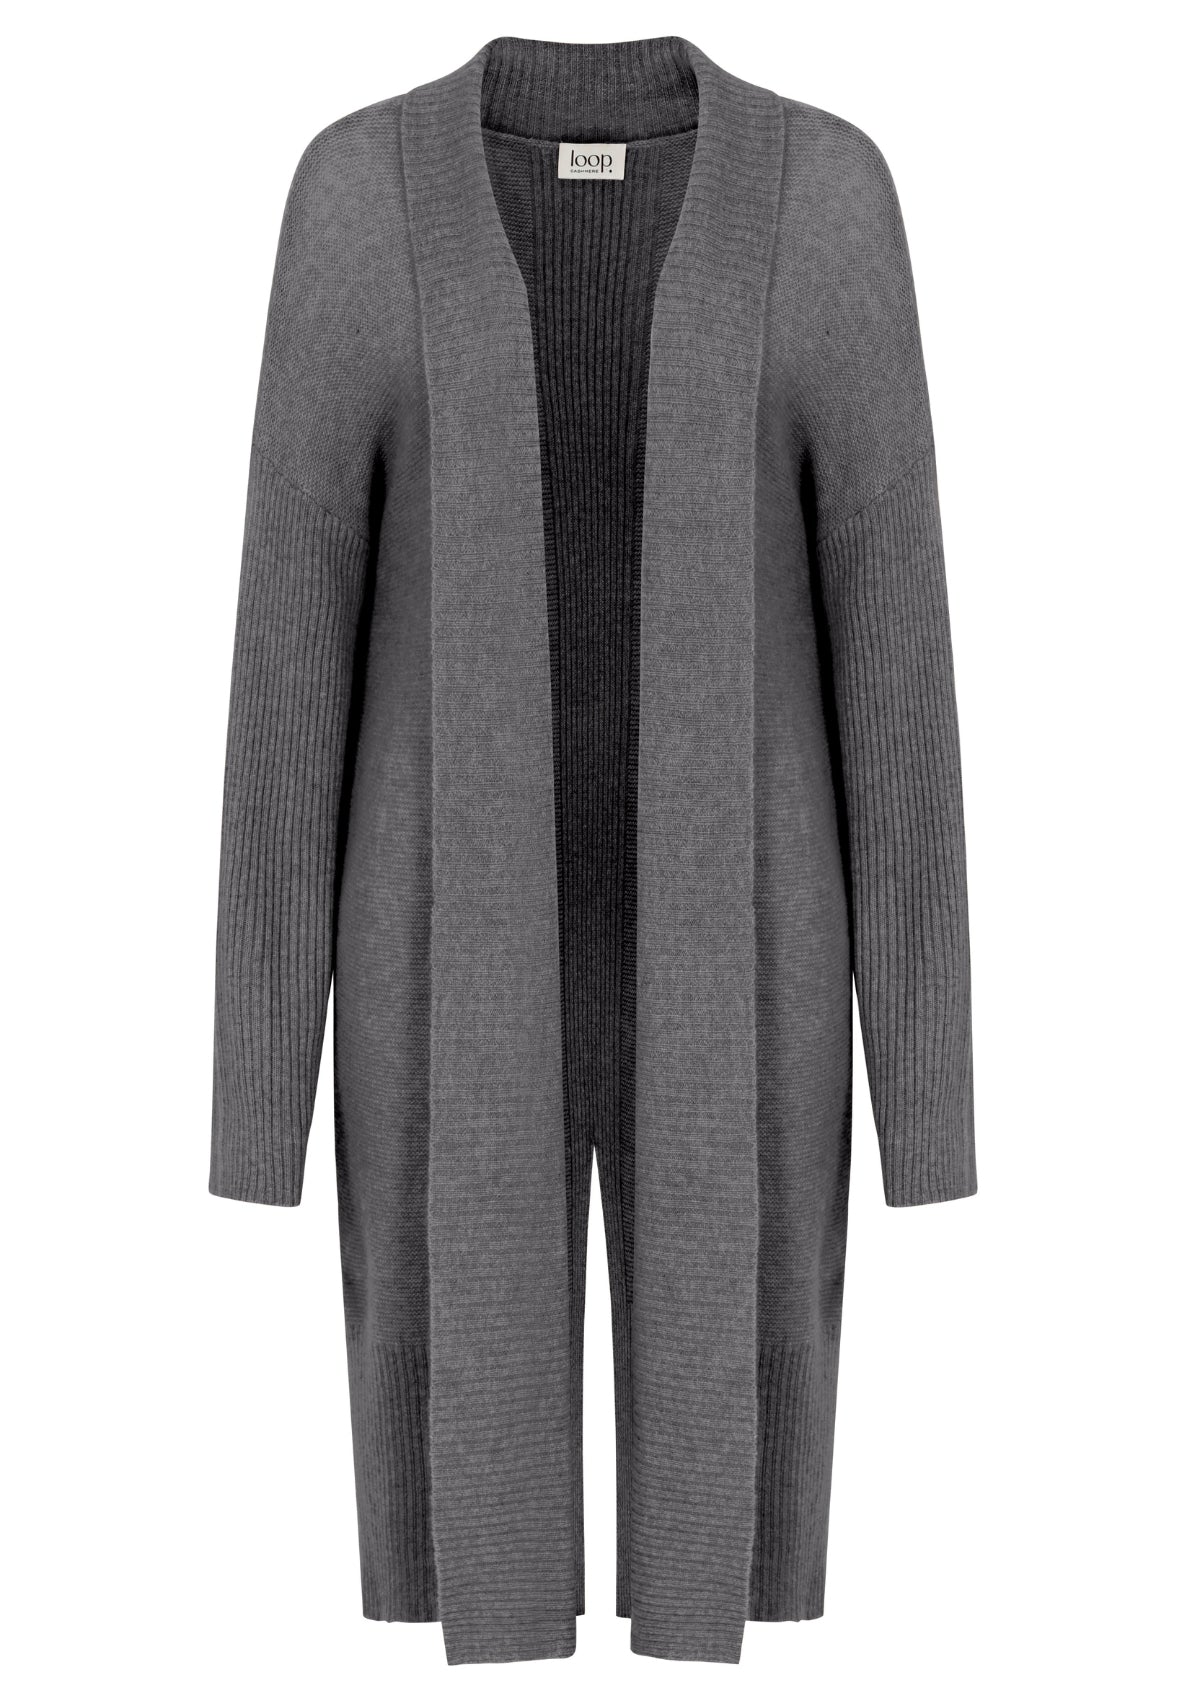 Cashmere Edge To Edge Cardigan in Pewter Grey